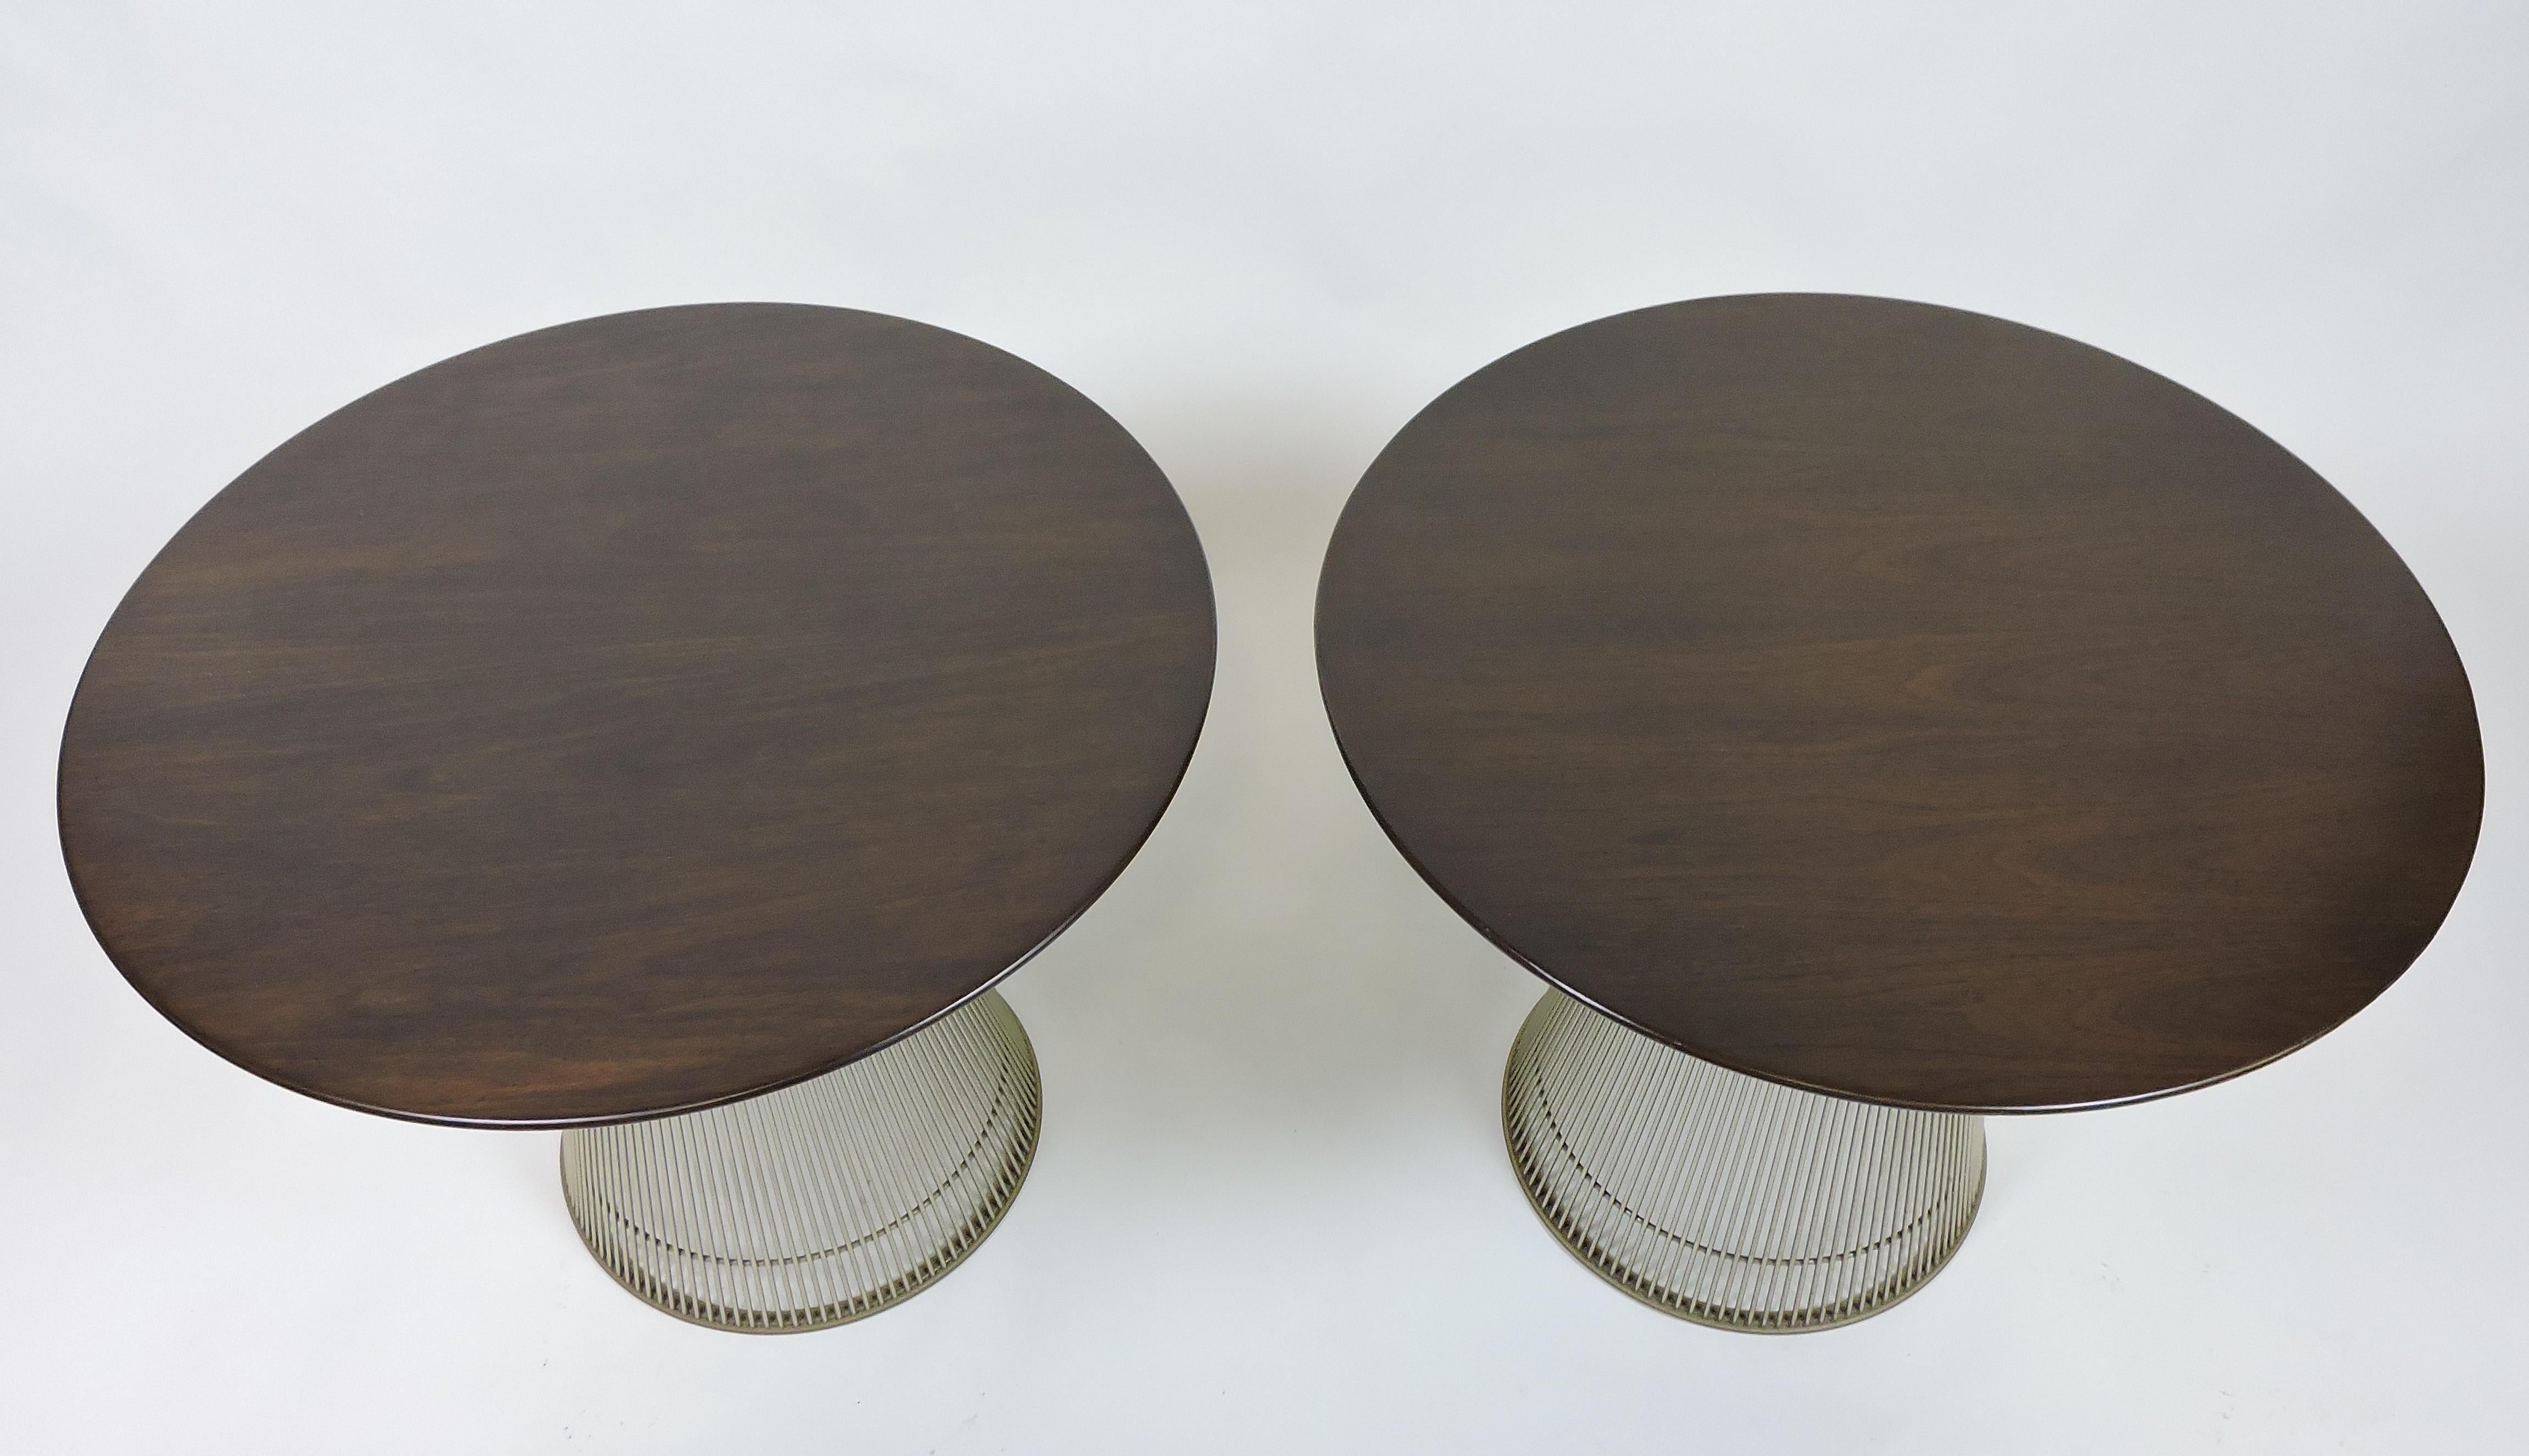 Pair of beautiful Warren Platner wire end or side tables manufactured by Knoll. These are the earlier tables with a larger walnut top that hangs over the edges of the wire base, and which are no longer manufactured. Both labeled with early Knoll